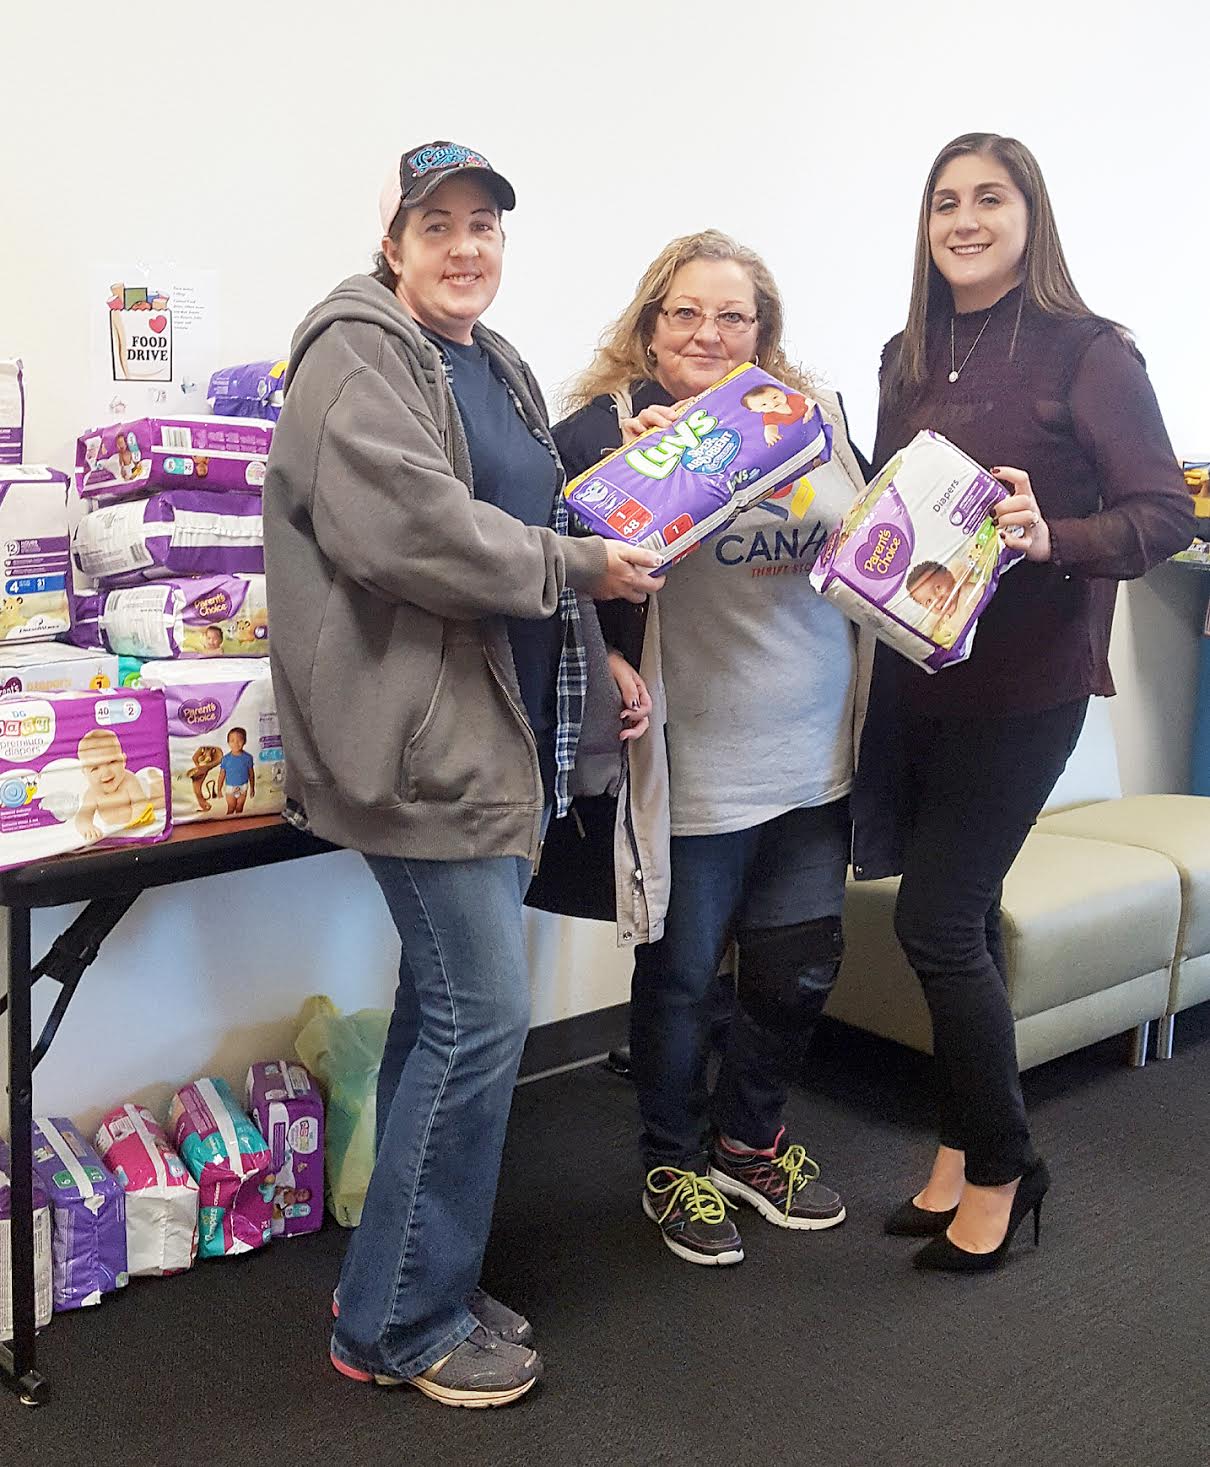 PJC’s Blend Club Collects Donations for CANHELP